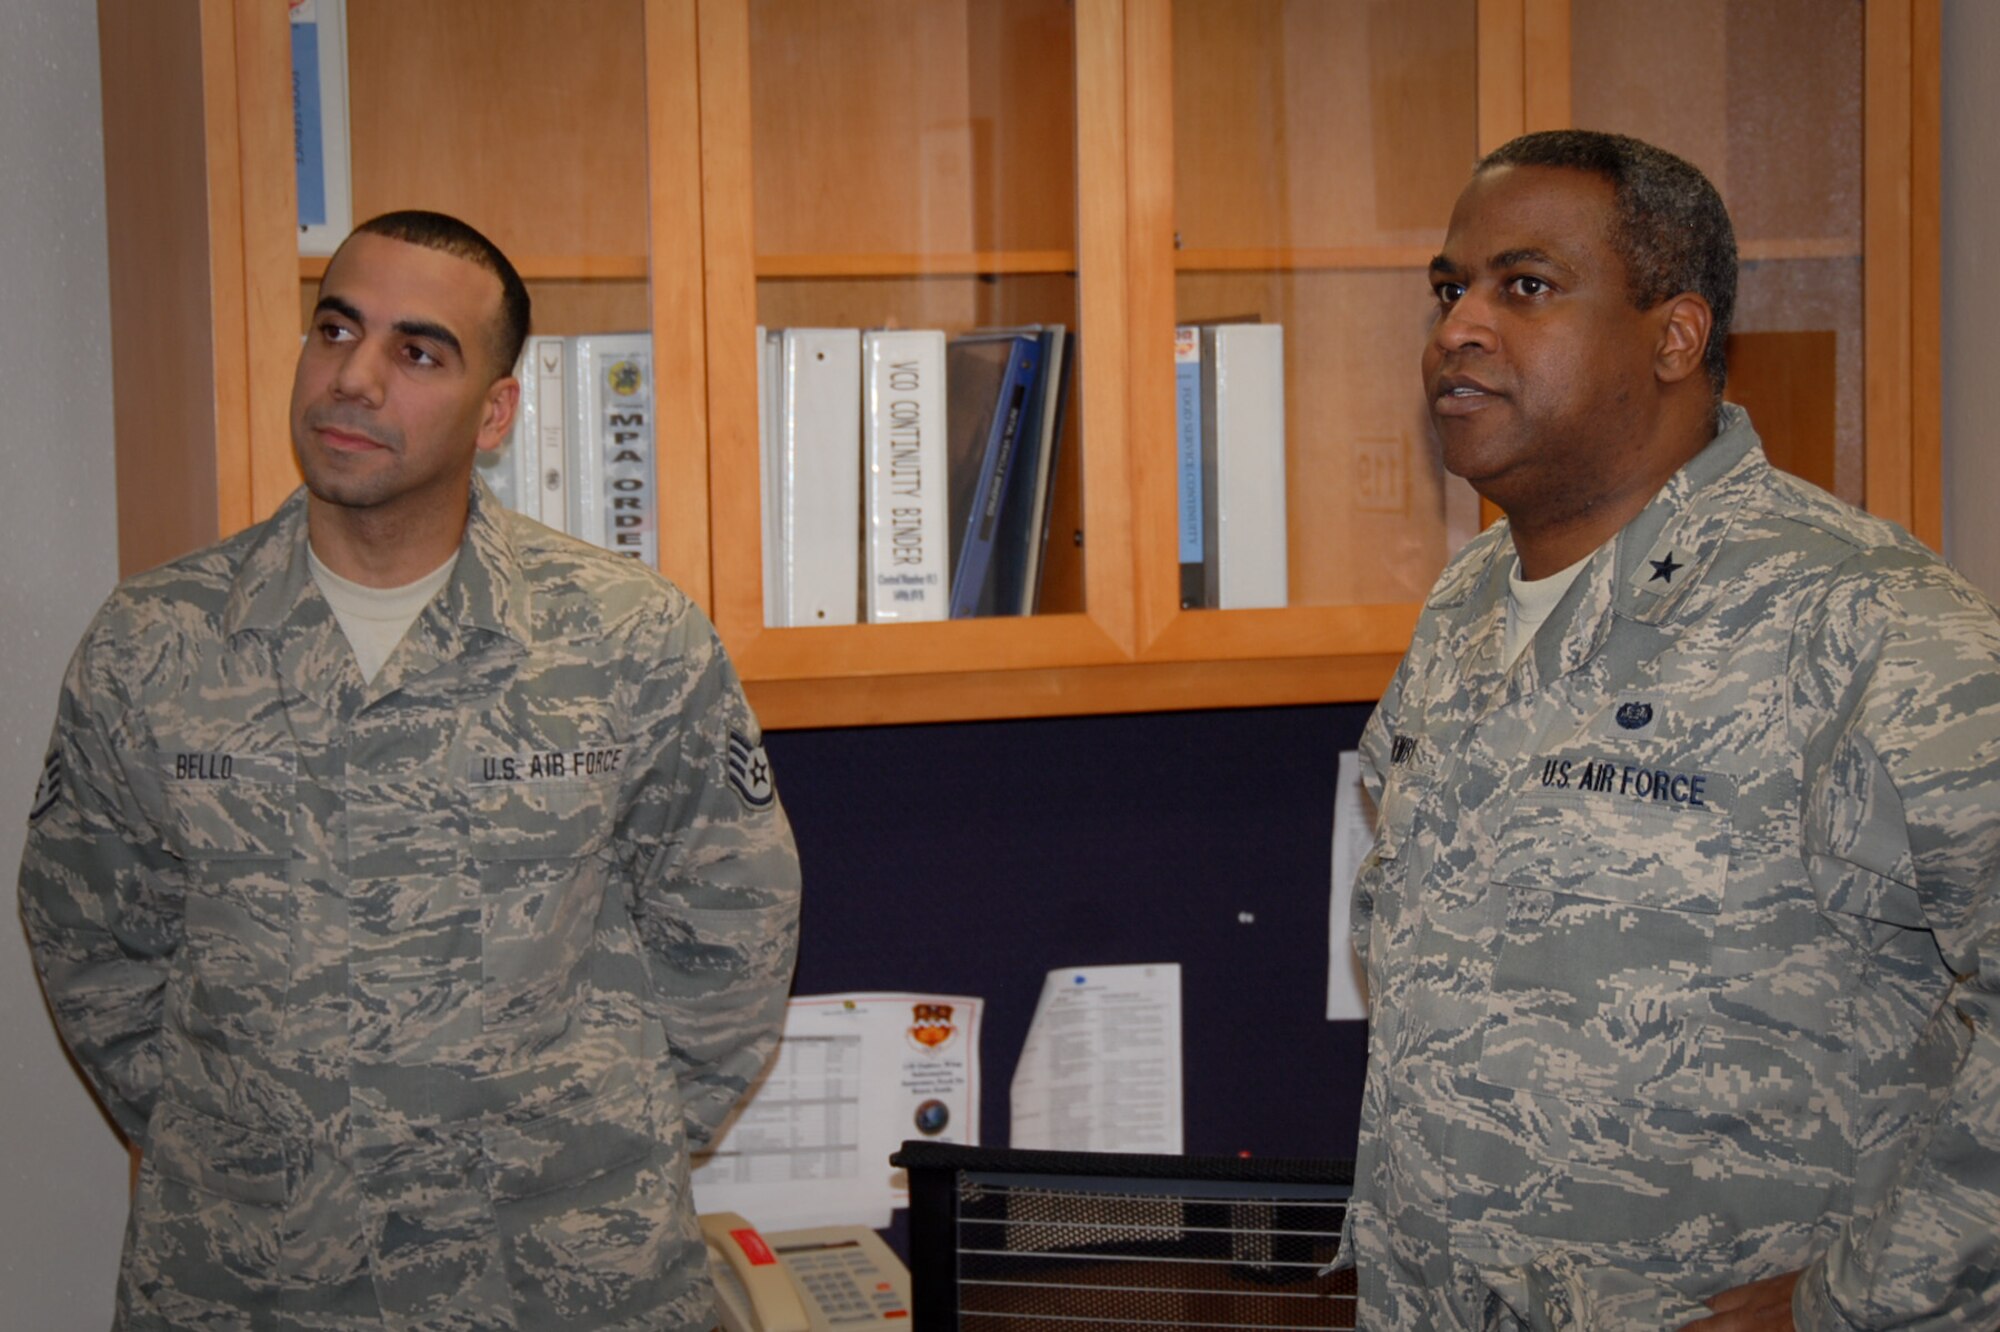 Brig. Gen. Brian C. Newby, chief of staff for the Texas Air National Guard, visits with Staff Sgt. Edwin Bello, a member of the 149th Fighter Wing, also known as the Lone Star Gunfighters, at Lackland Air Force Base, Texas, during the unit training assembly, or UTA, Feb. 11, 2012. (National Guard photo by Staff Sgt. Phil Fountain / Released)